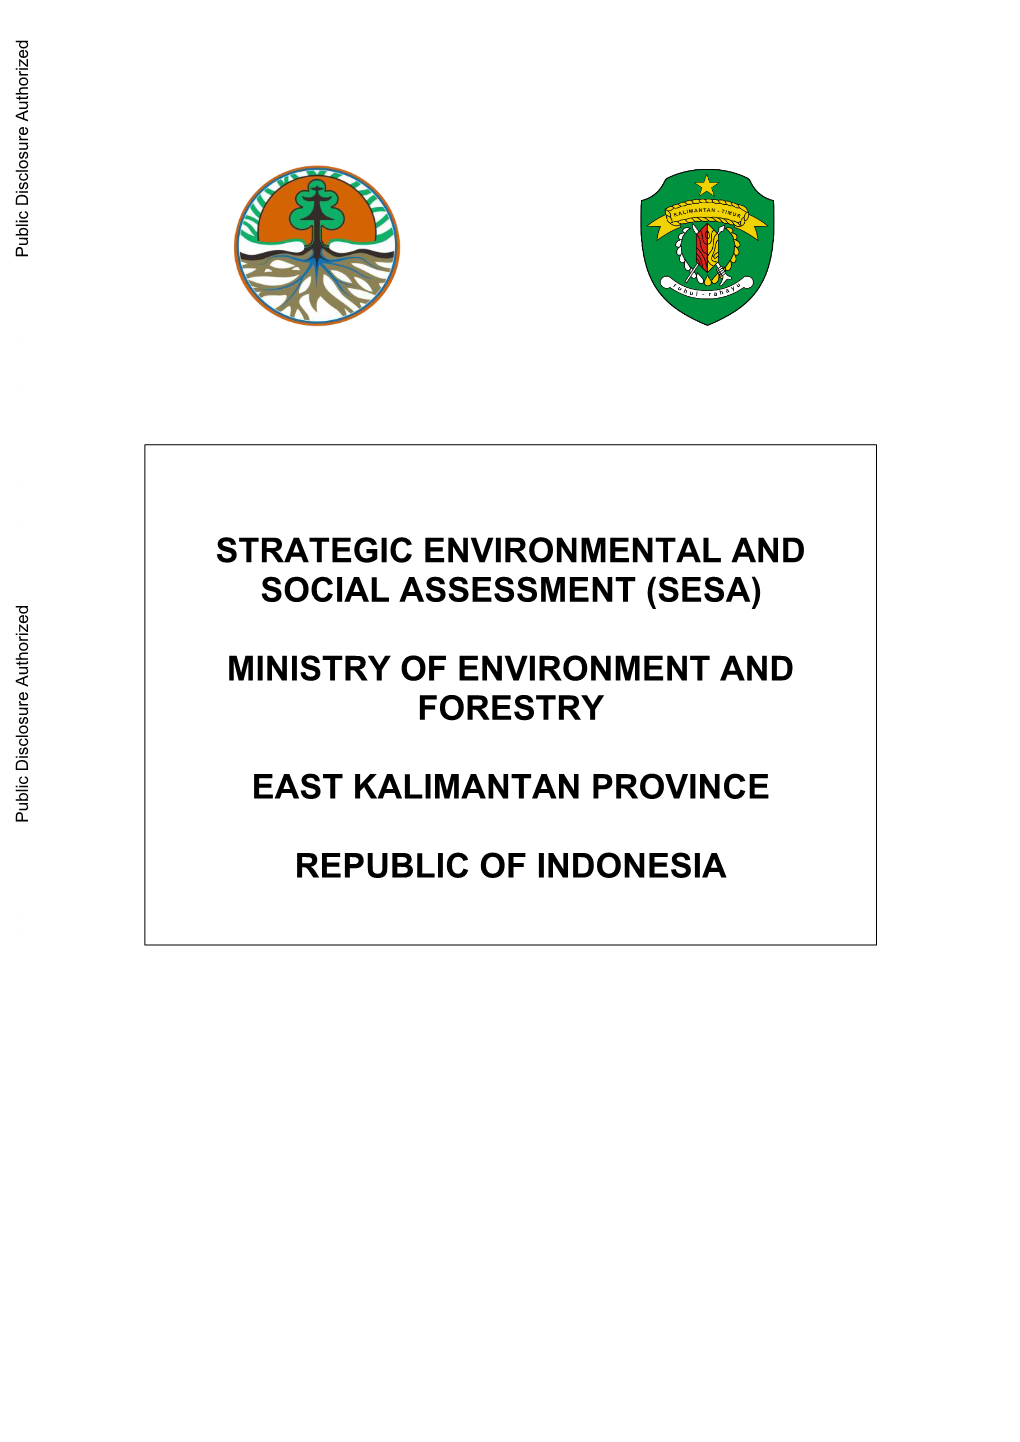 (Sesa) Ministry of Environment and Forestry East Kalimantan Province